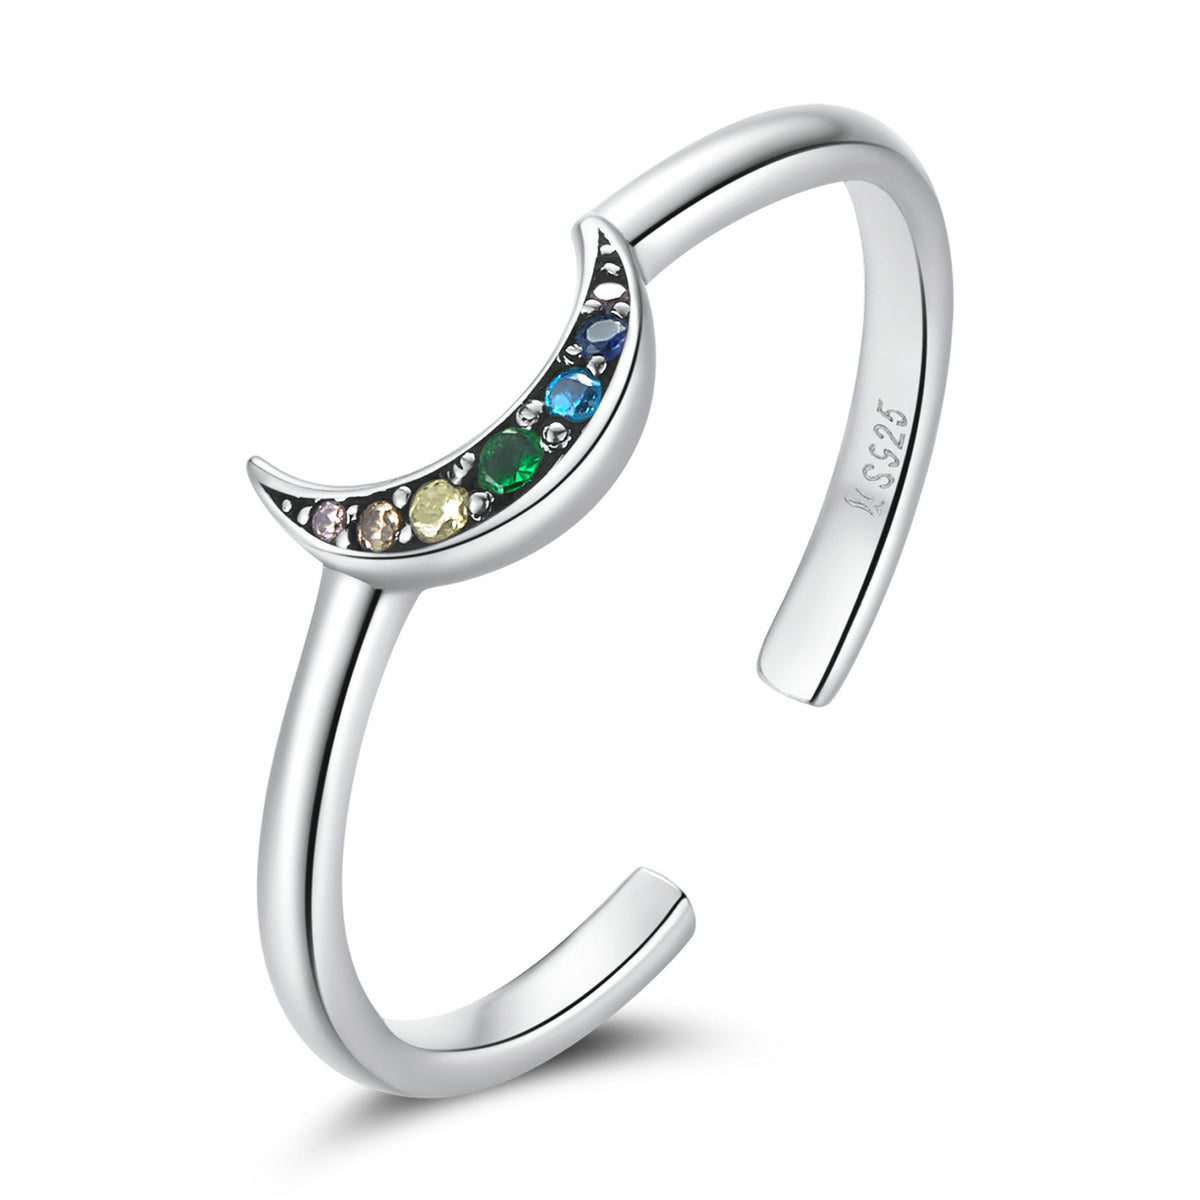 Zola Adjustable Moon Ring in Sterling Silver Platinum Plated - Bonjeur Precious                                                                                                                